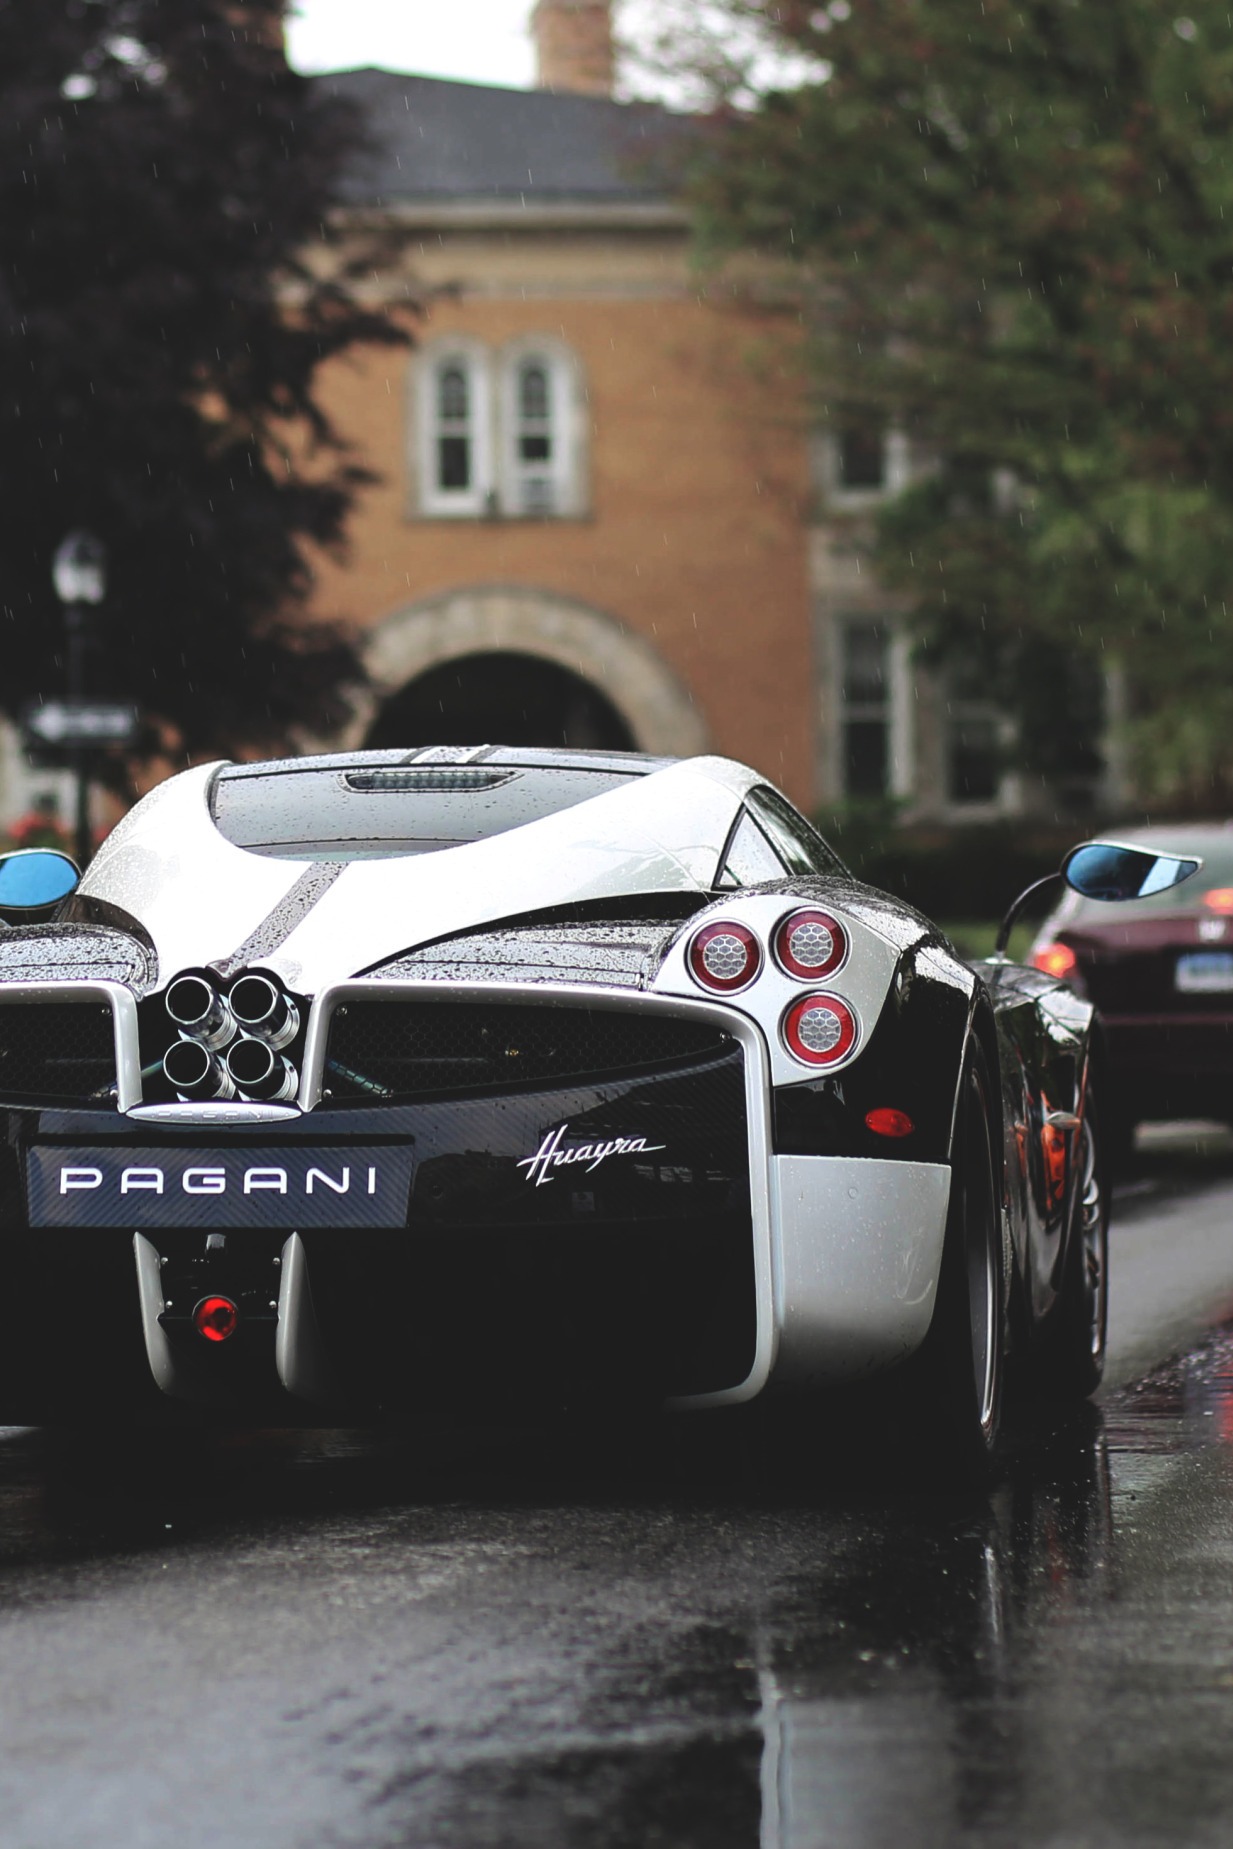 Pagani Pictures  Download Free Images on Unsplash